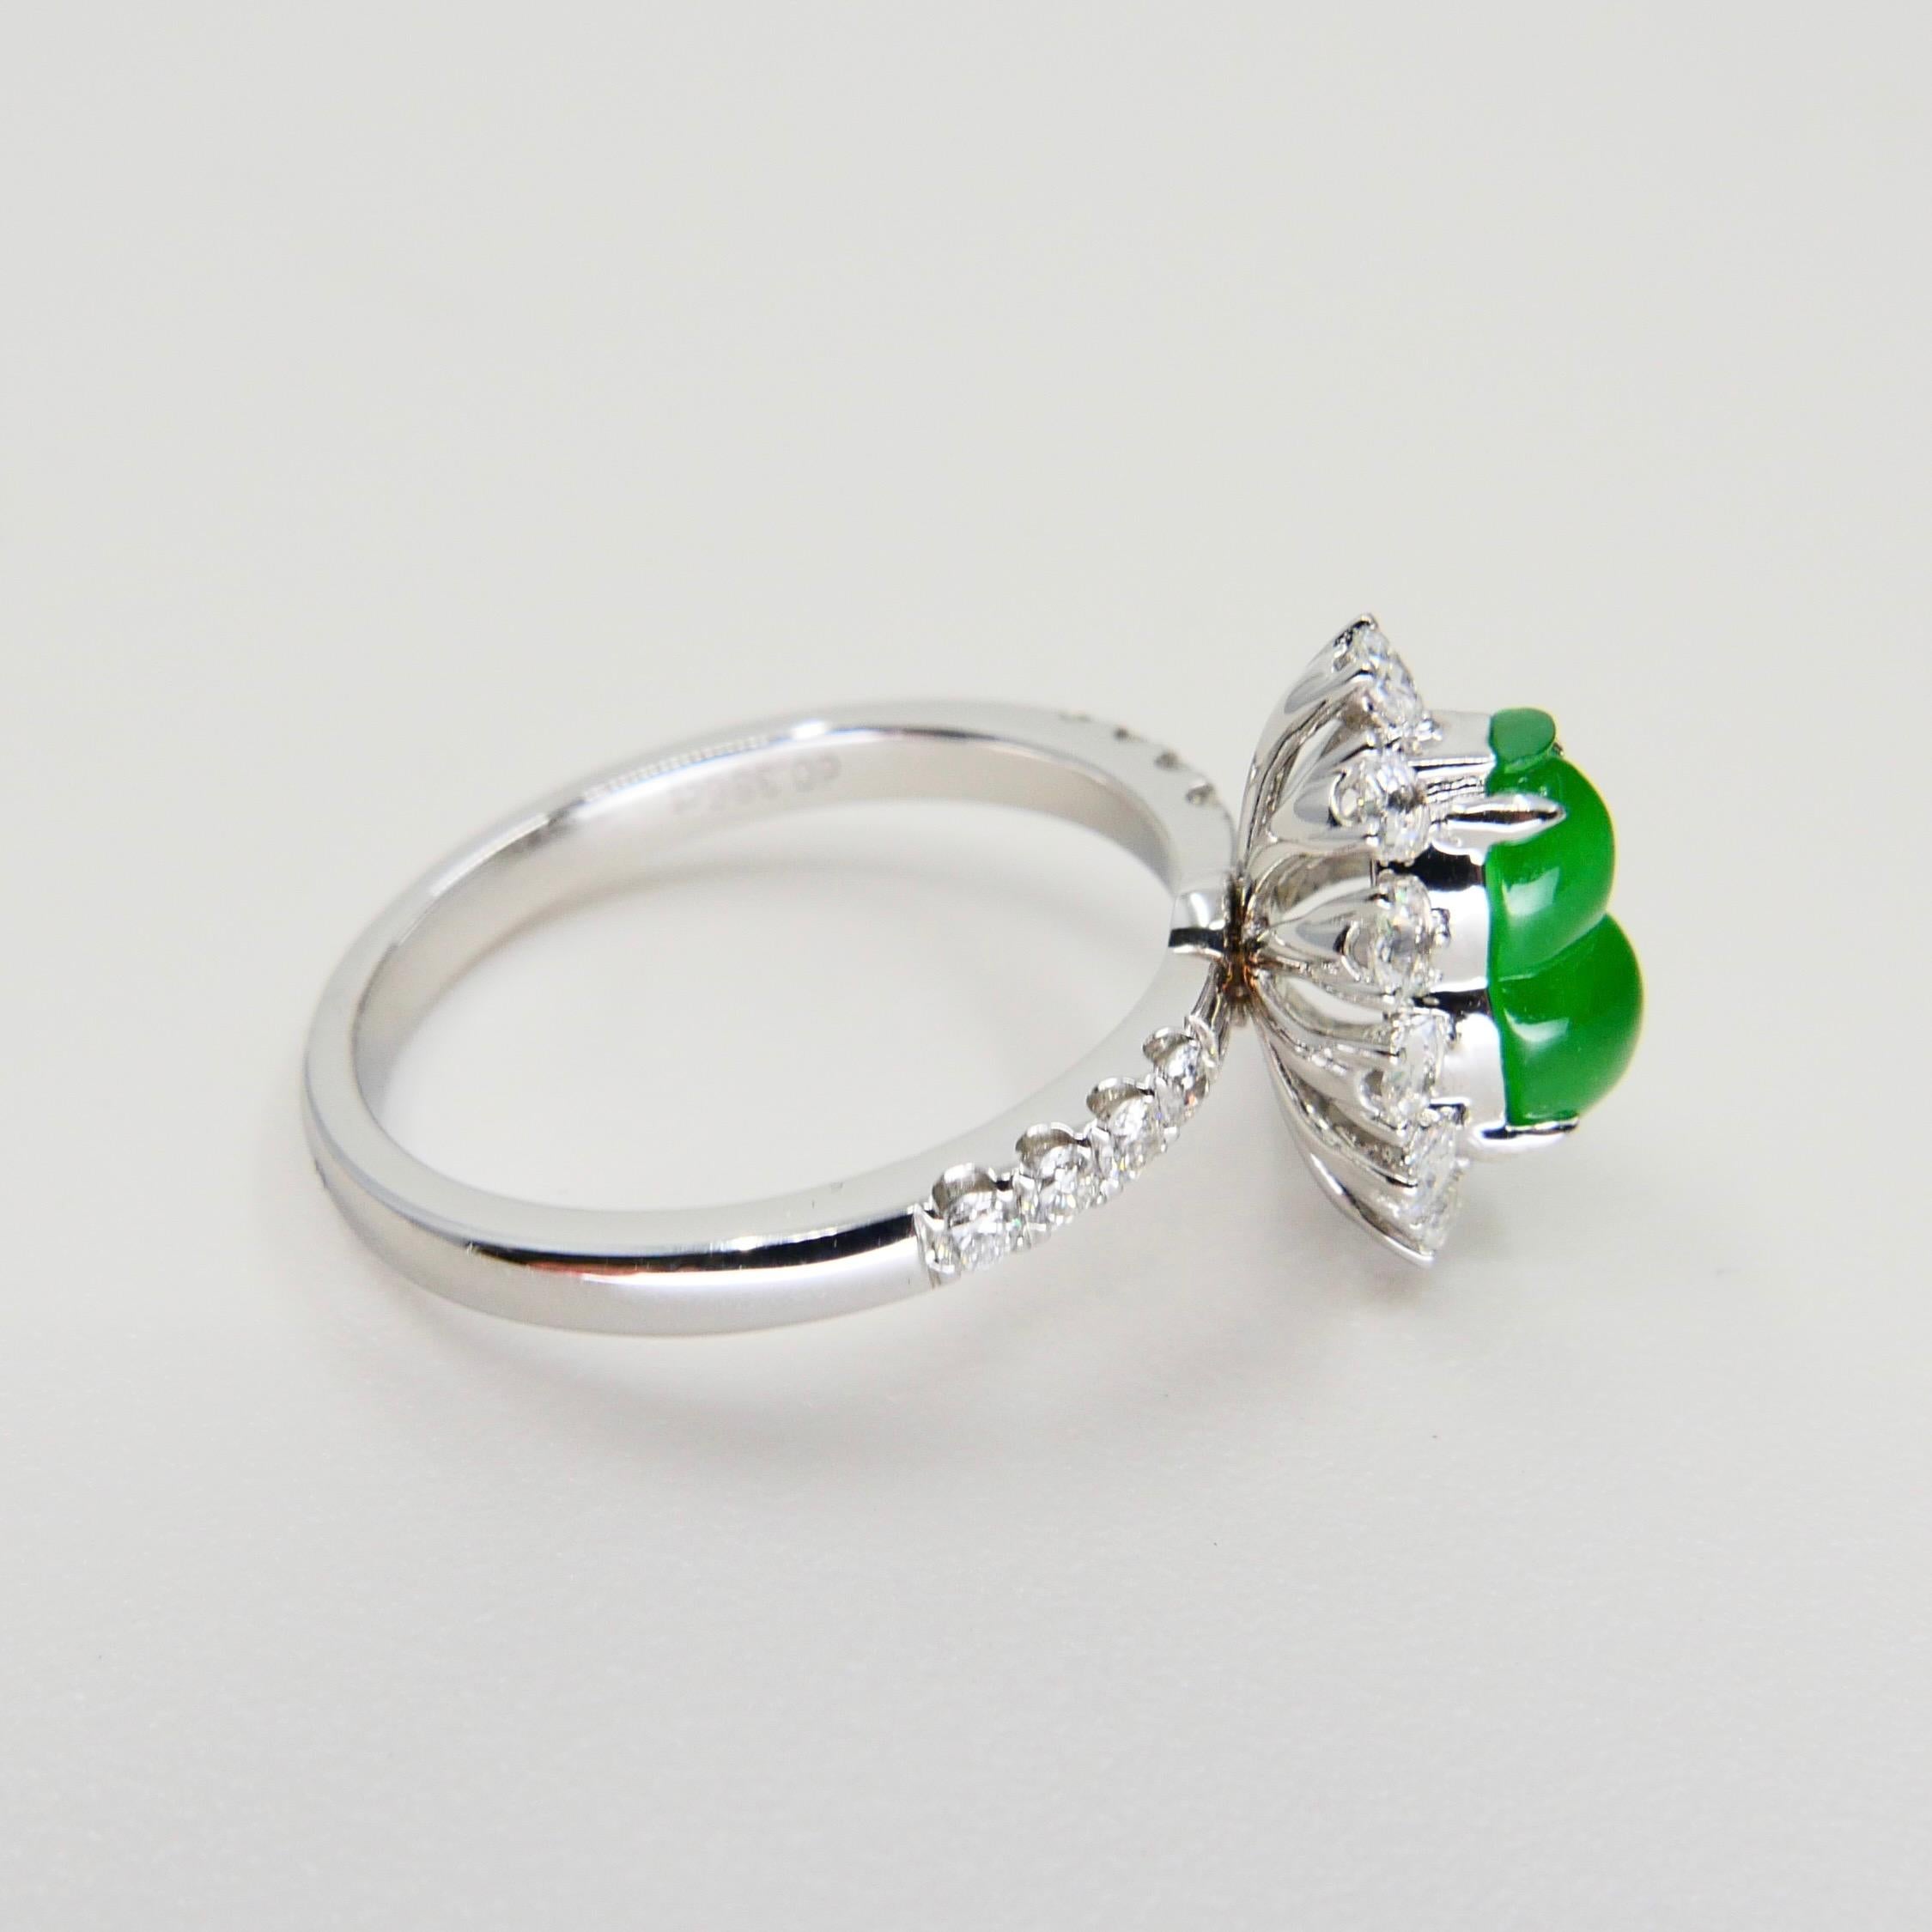 Certified Natural Imperial Jade Gourd & Diamond Cocktail Ring, Super Glow 6